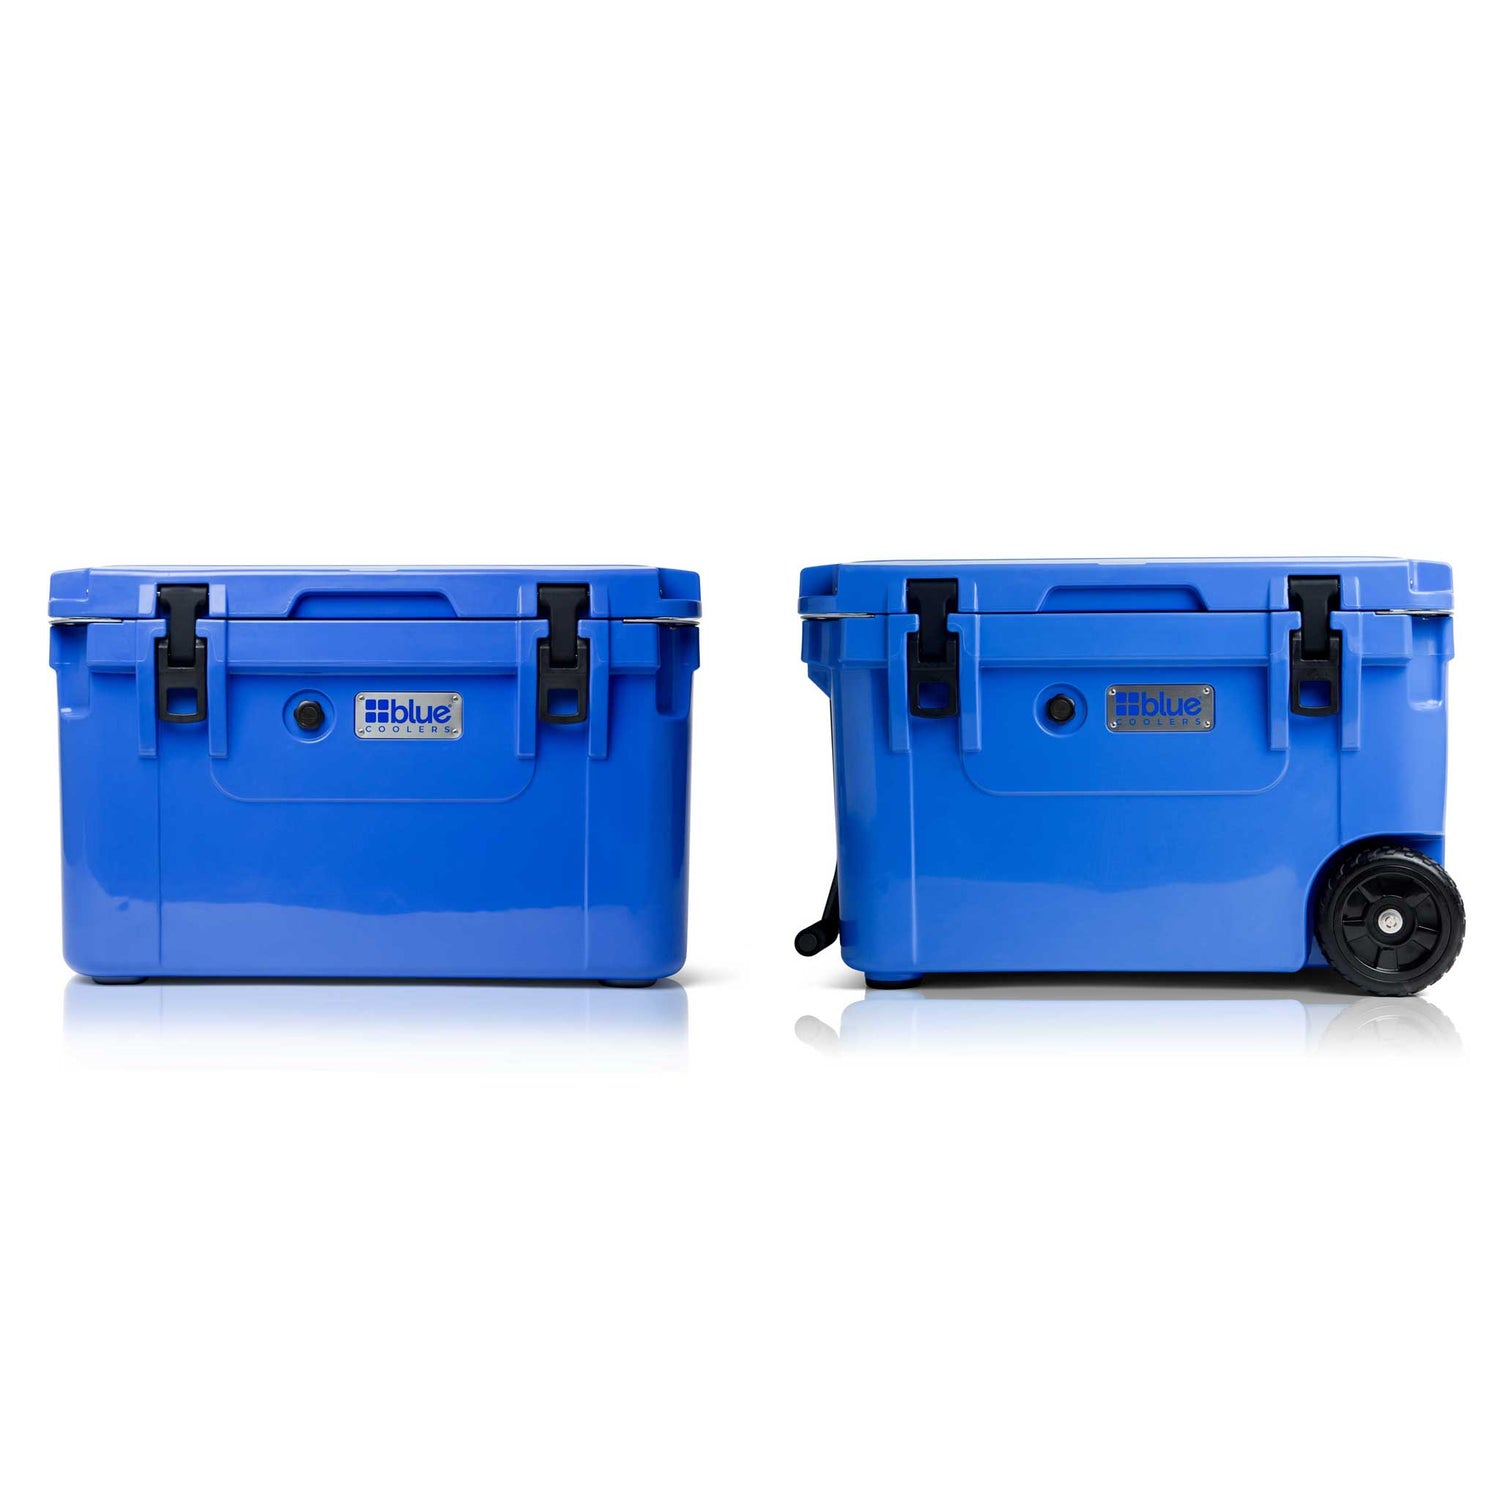 https://cdn.shopify.com/s/files/1/2243/6539/products/60Q-Double-Pack-Trademark-Blue.jpg?v=1676994810&width=1500